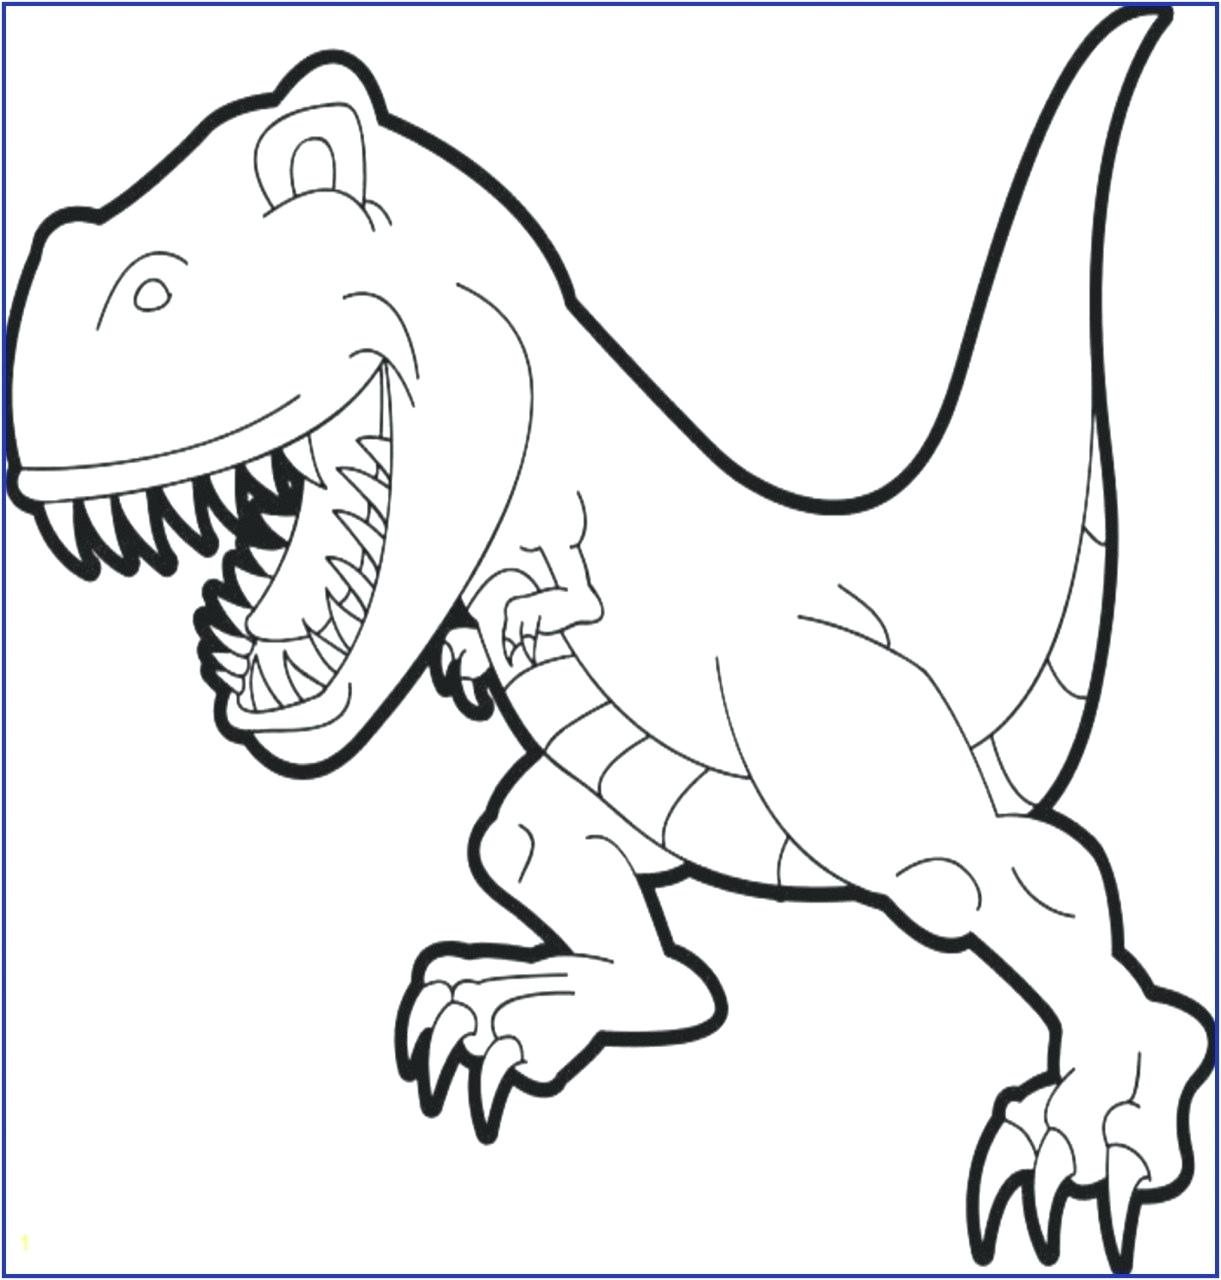 Coloring Pages : Coloring Pages Lego Jurassic World ...